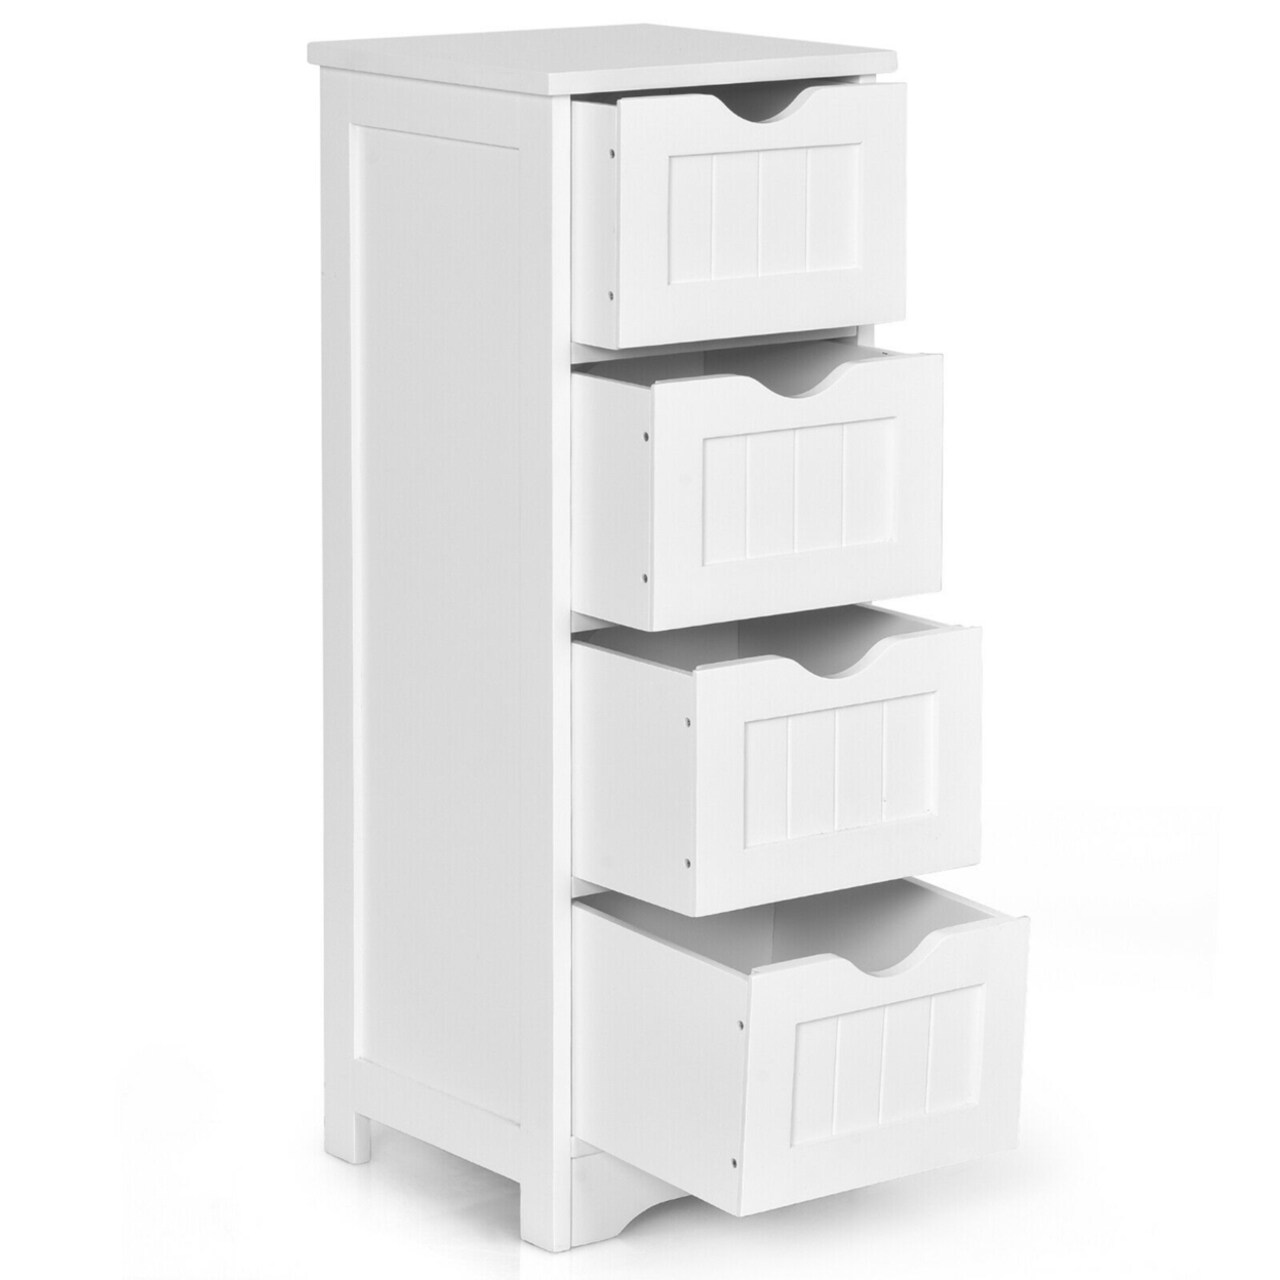 Bathroom Storage Cabinets Free Standing with 4 Drawers White for